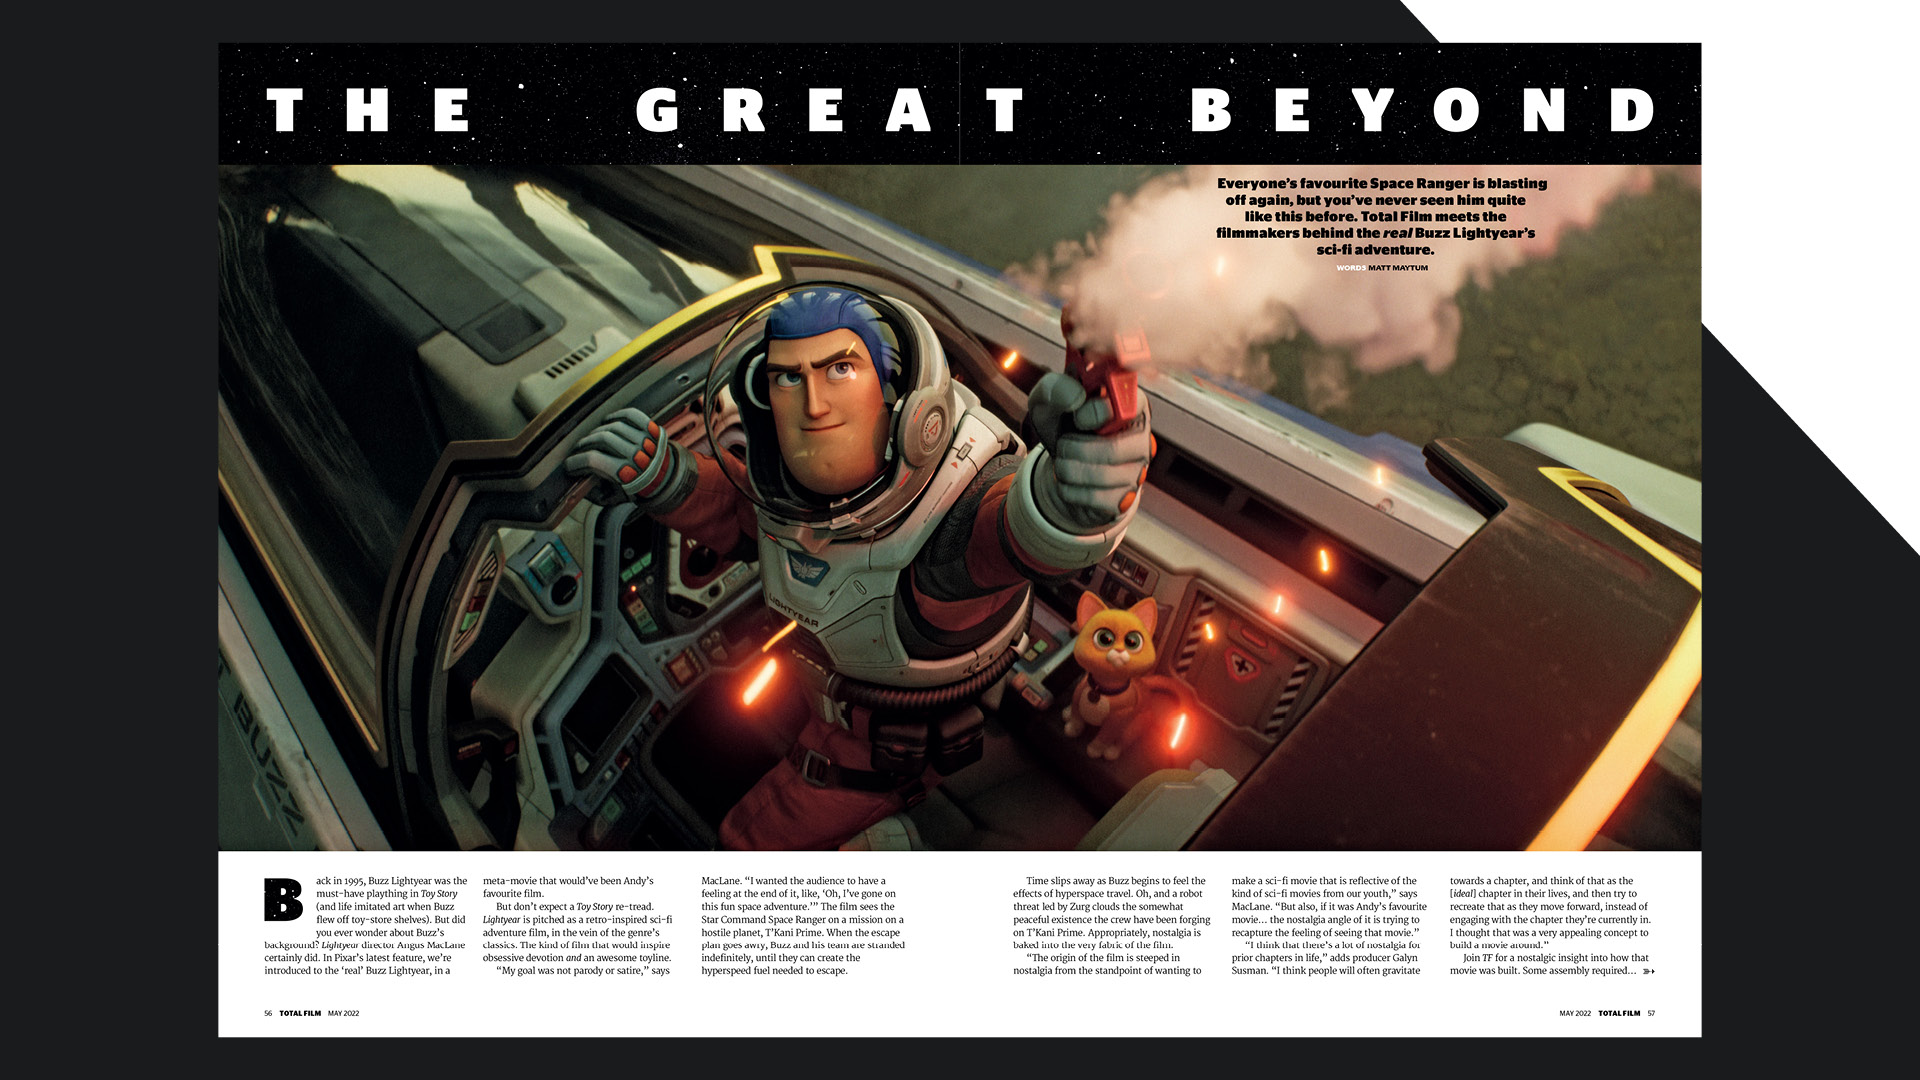 Lightyear feature films by Total Film